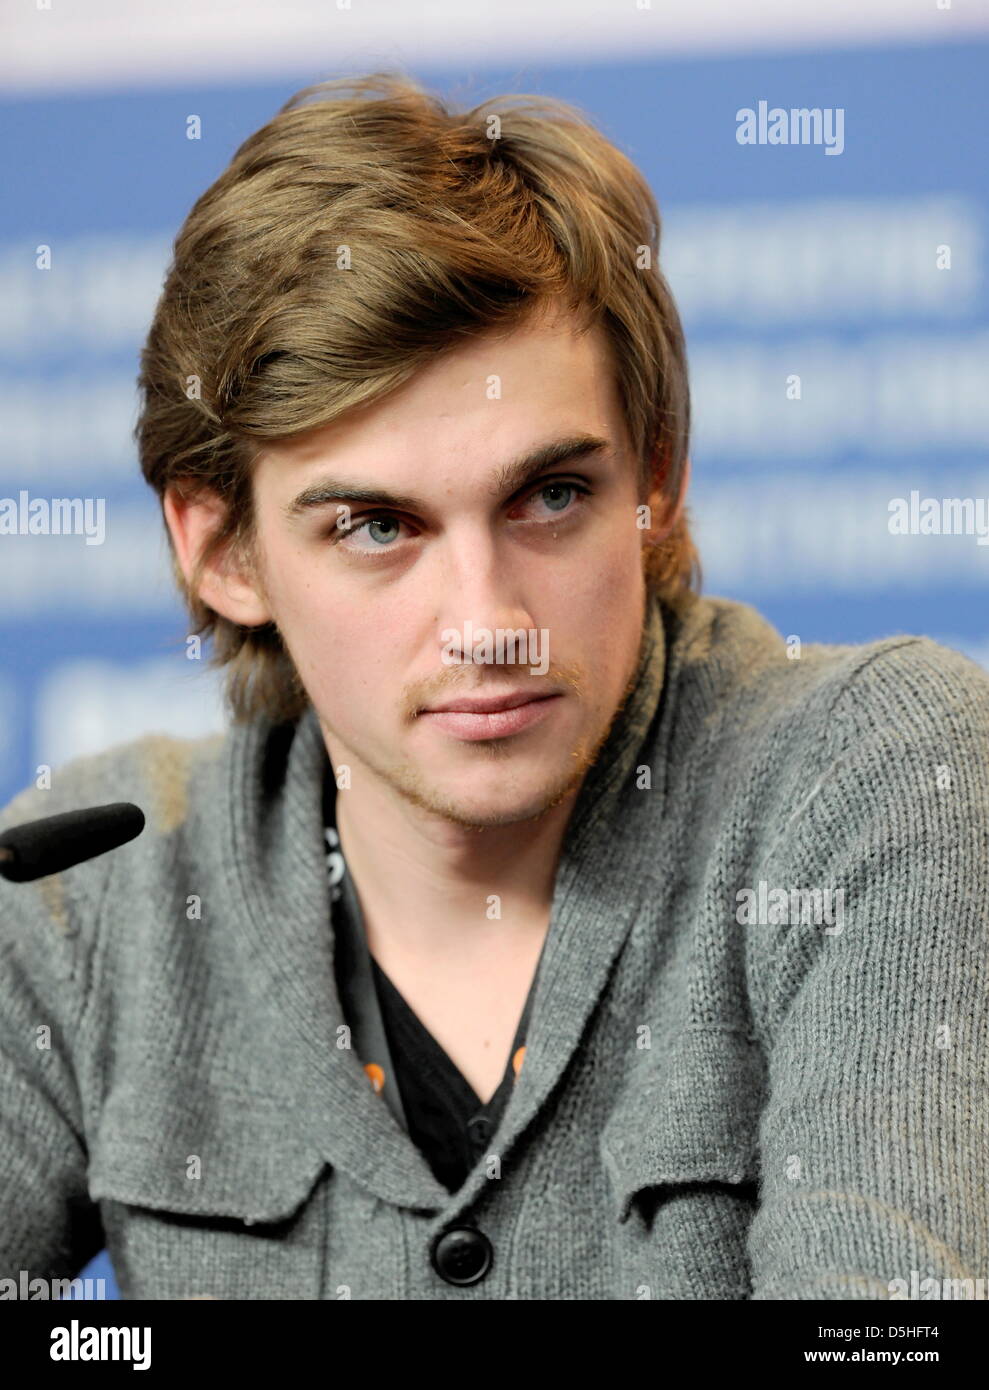 Finnish actor Lauri Tilkanen attends a press conference for the film 'Bad Family' (Paha Perhe) running in the Panorama Special section during the 60th Berlinale International Film Festival in Berlin, Germany, Sunday, 14 Febuary 2010. Photo: Tim Brakemeier dpa/lbn Stock Photo